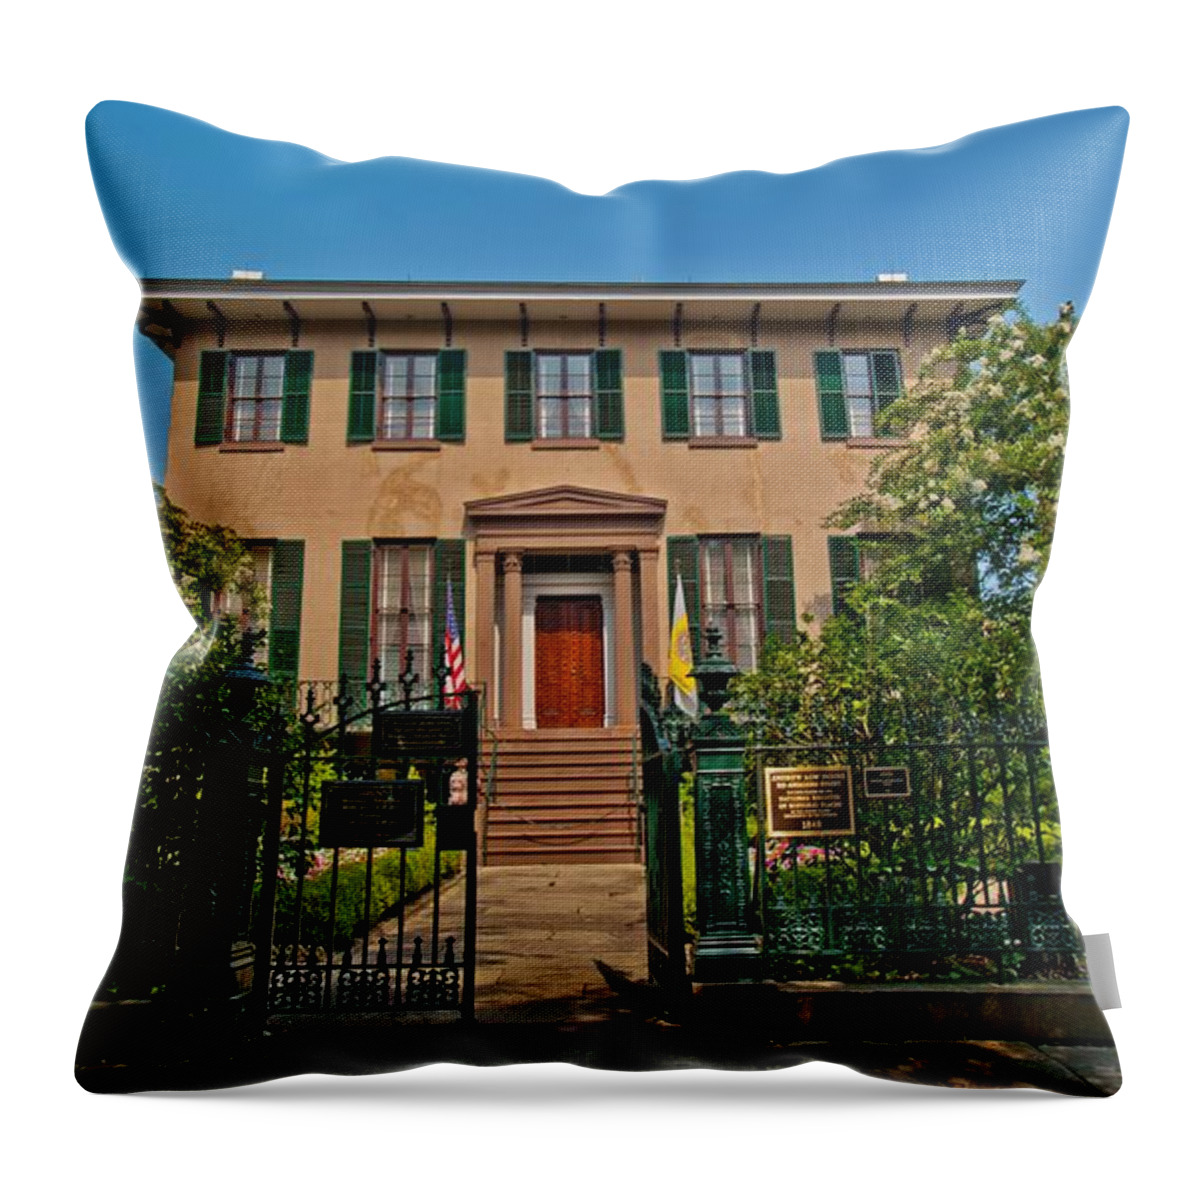 The Andrew Lowe House Throw Pillow featuring the photograph Andrew Lowe House by Southern Photo